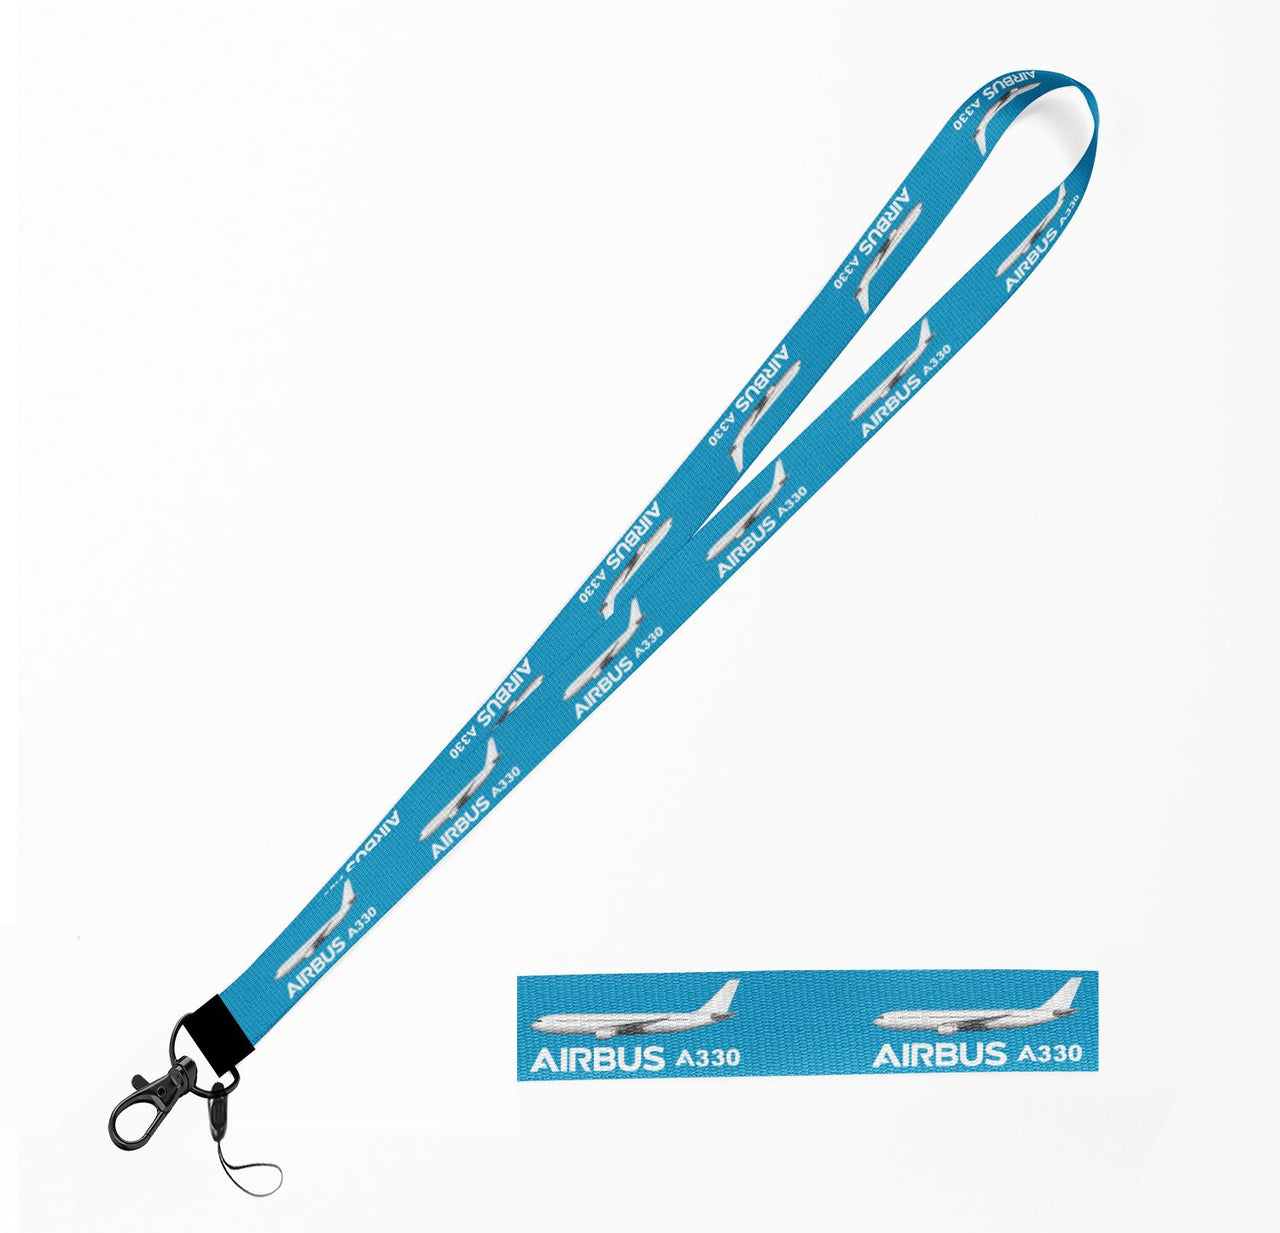 The Airbus A330 Designed Lanyard & ID Holders